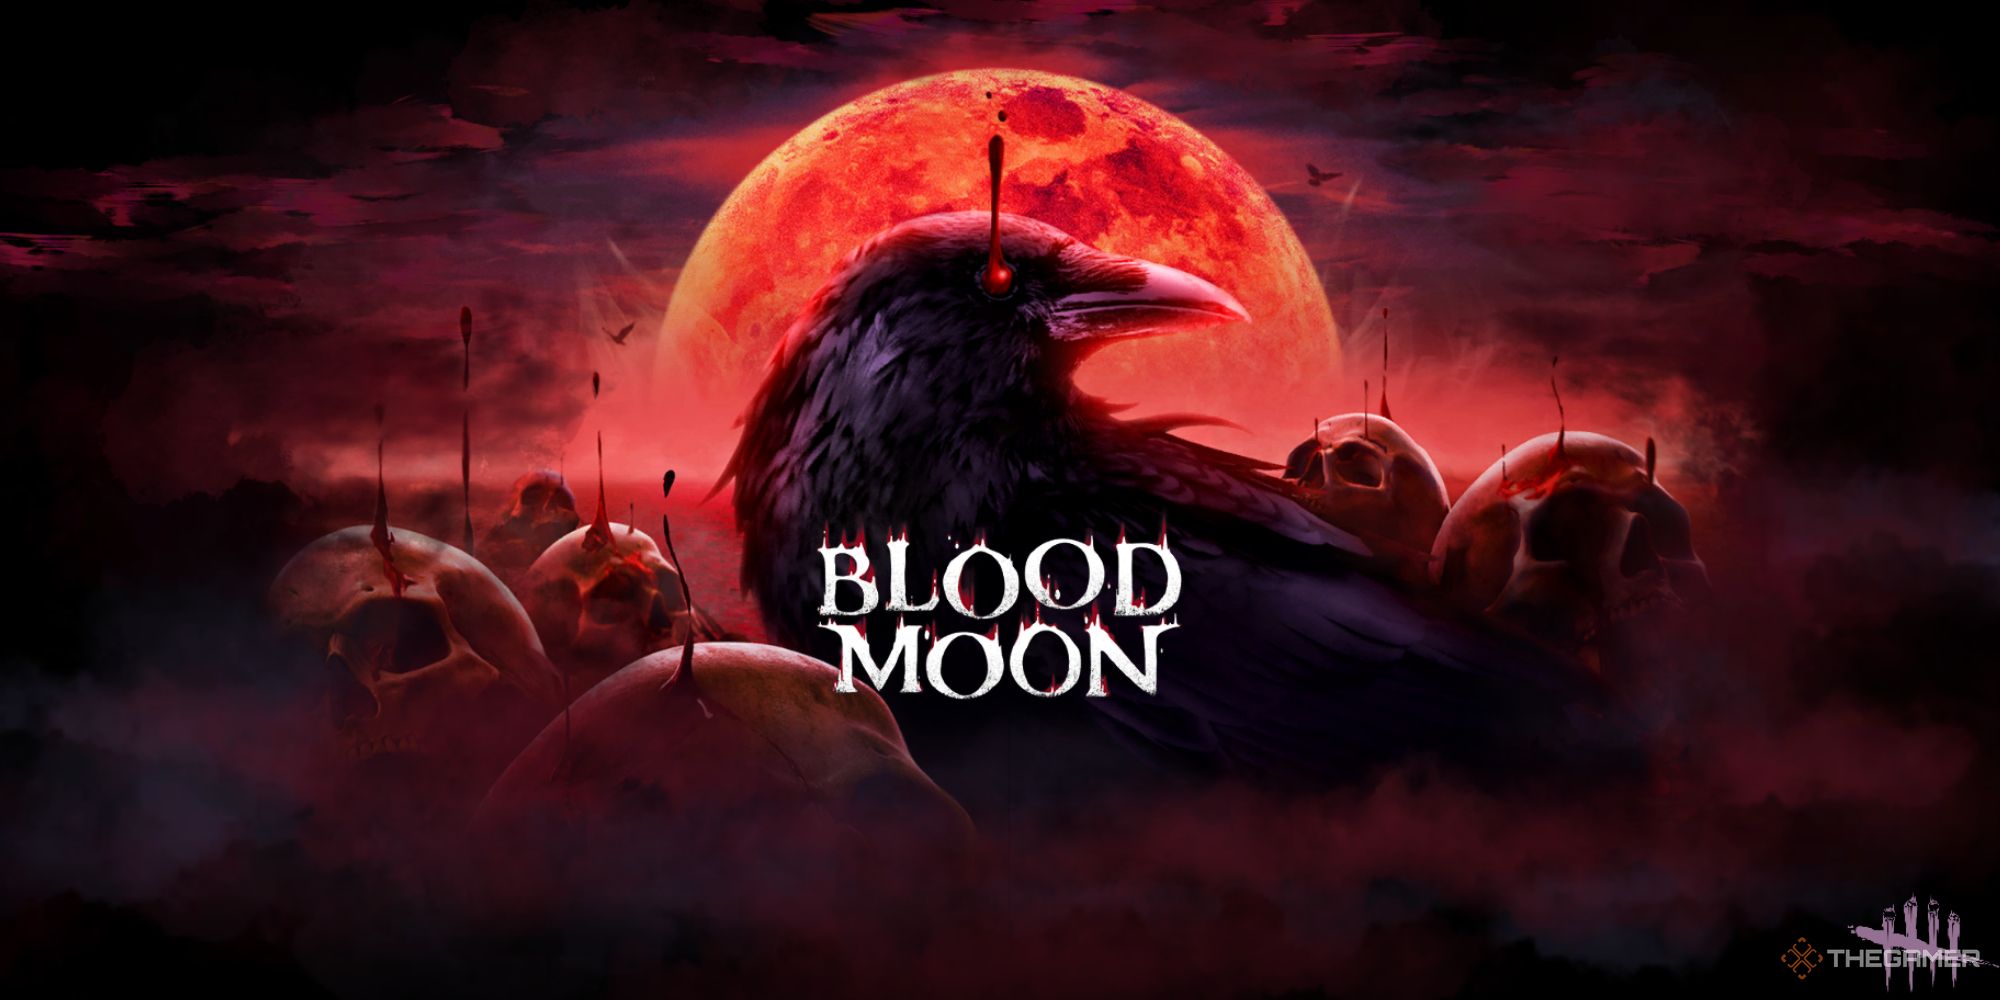 A crow with a bloodshot eye stands in front of a red blood moon.